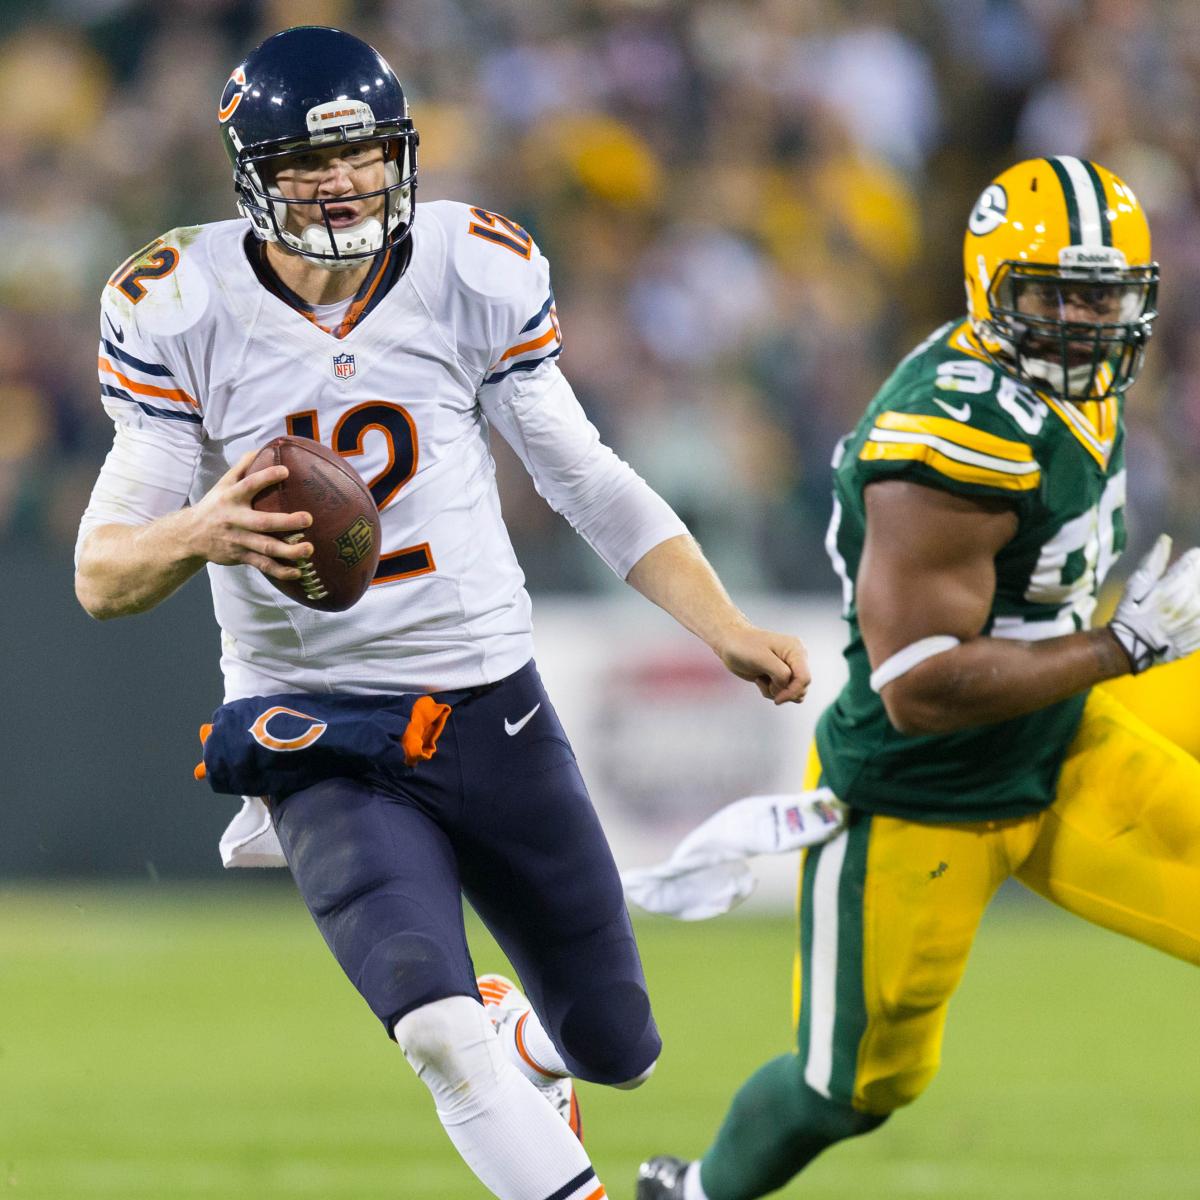 Chicago Bears vs. Green Bay Packers: Live Score, Analysis and